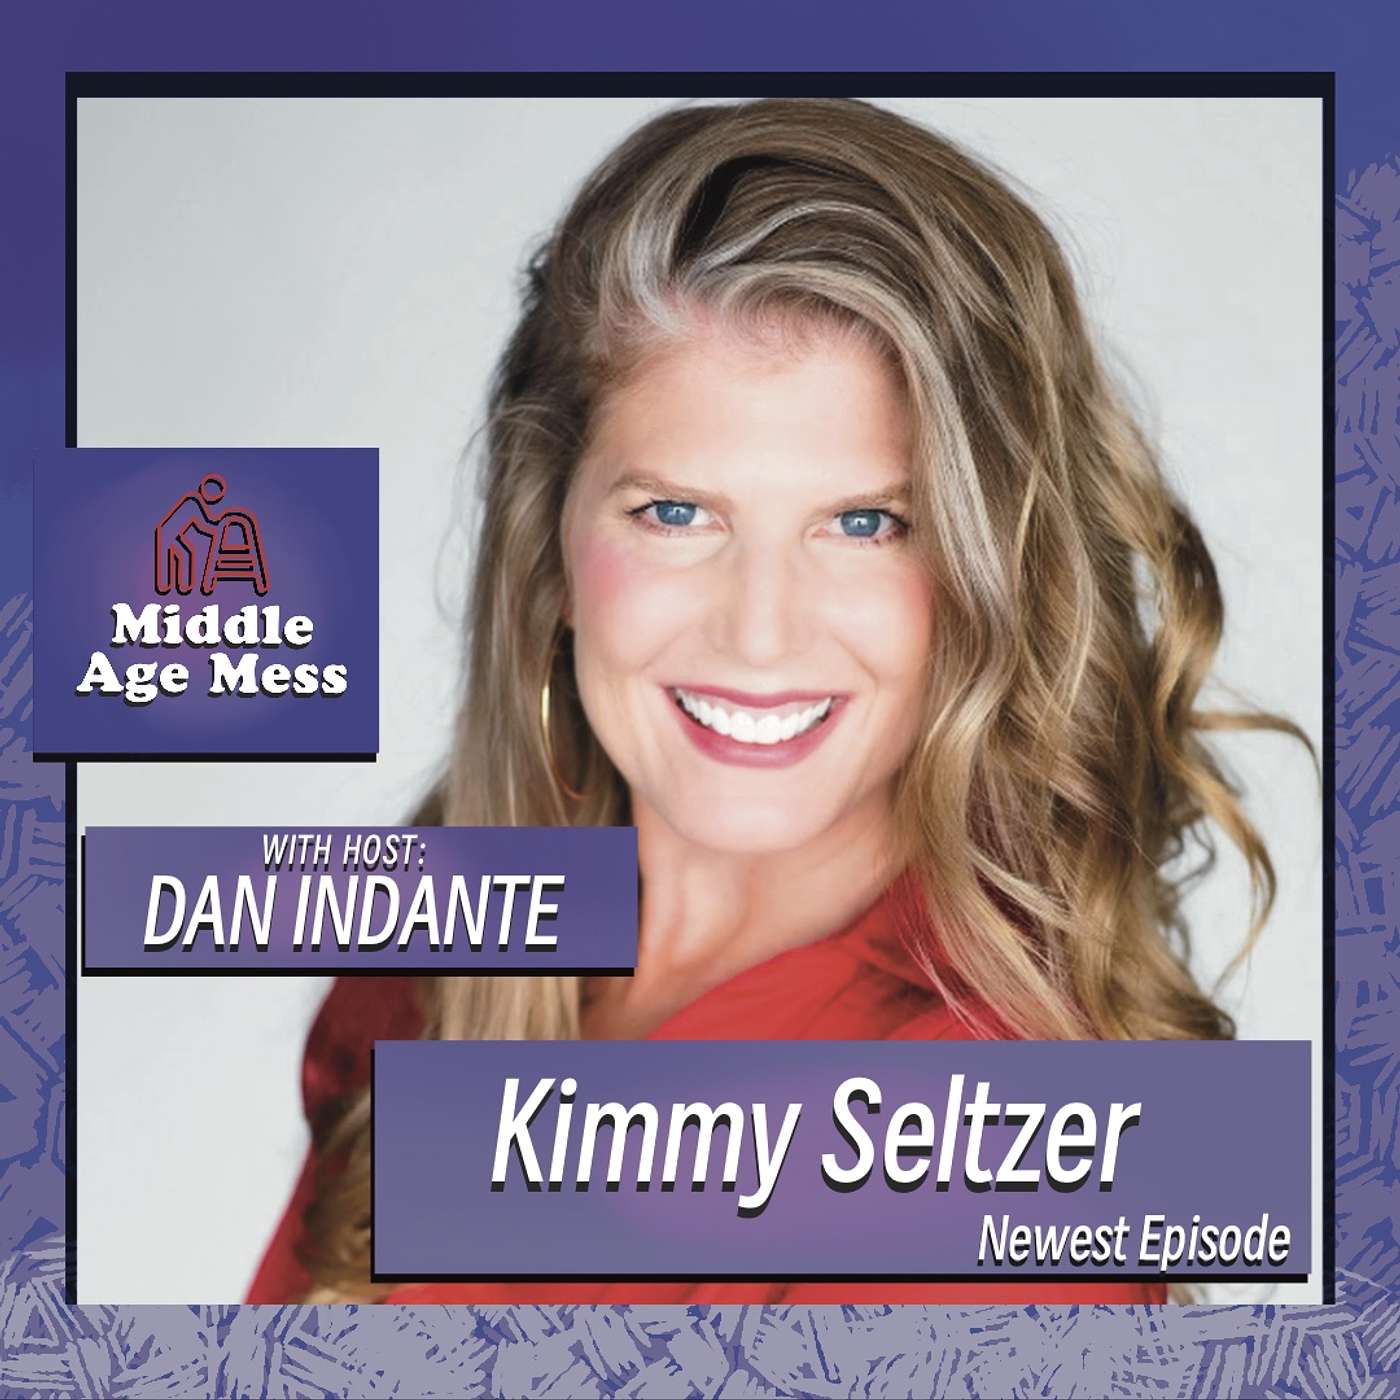 Middle Age Mess, Episode 6 - Kimmy Seltzer